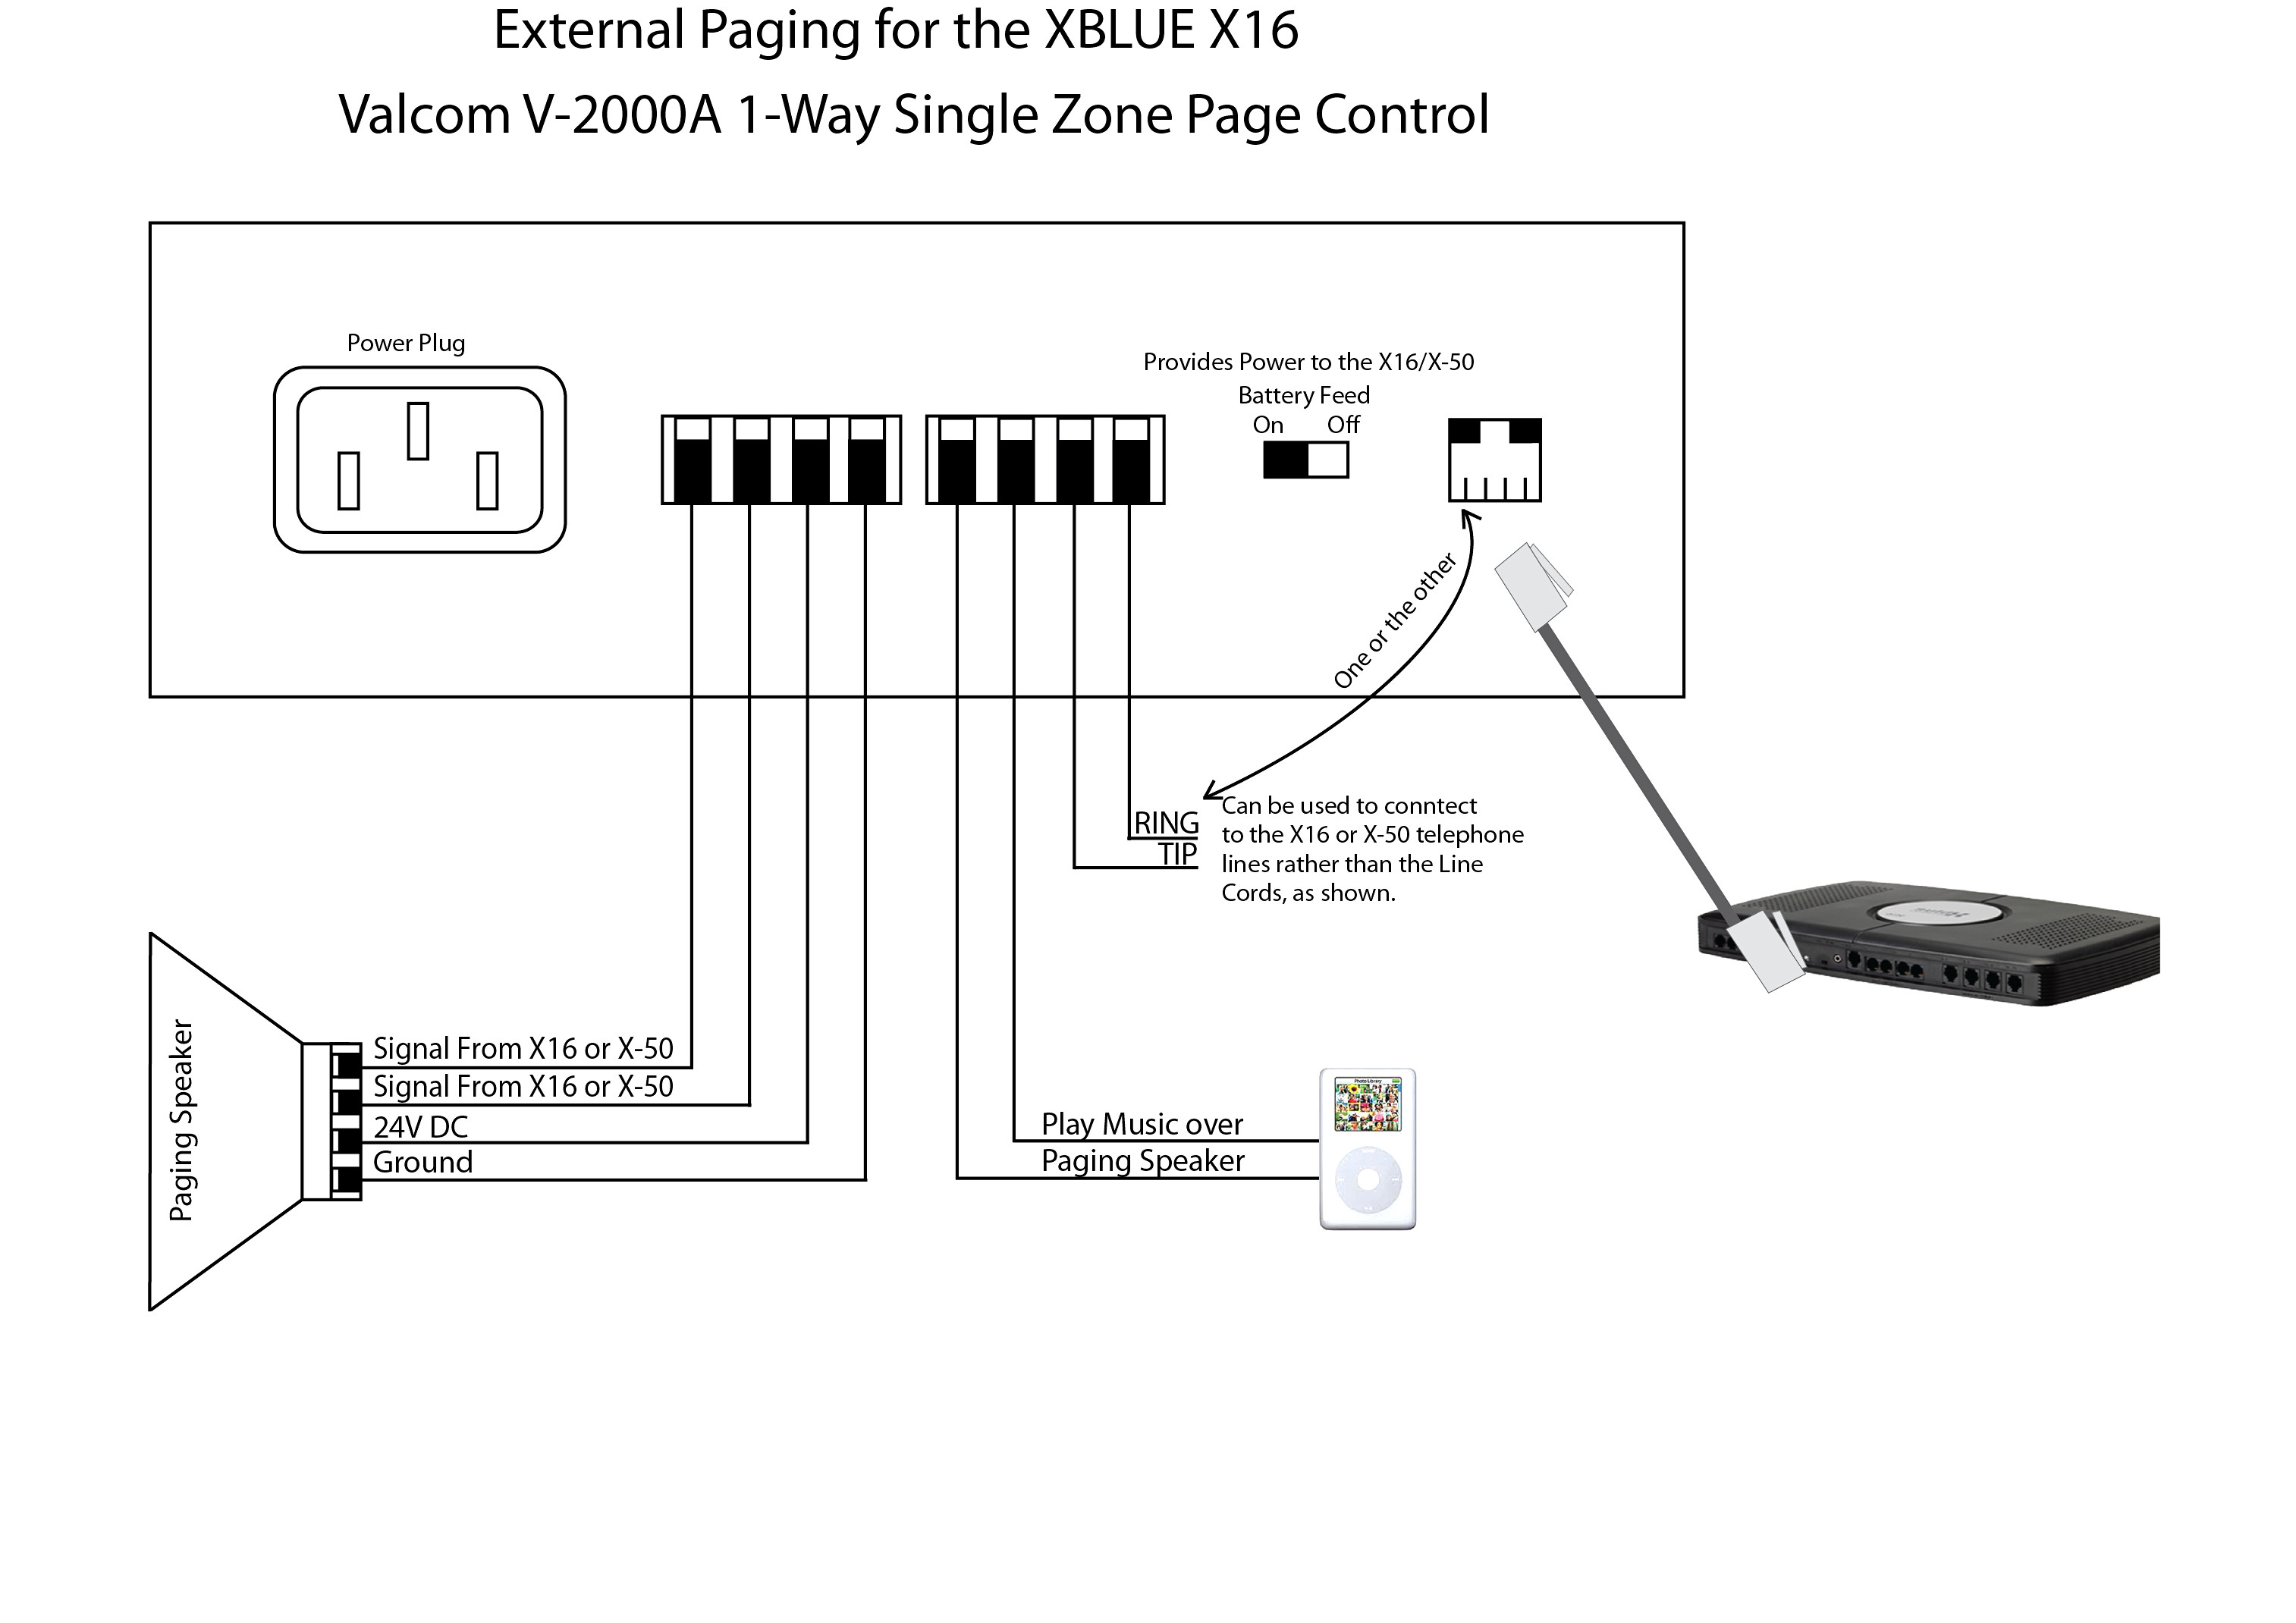 Valcom Paging Horn Wiring Diagram Collection - Wiring Diagram Sample